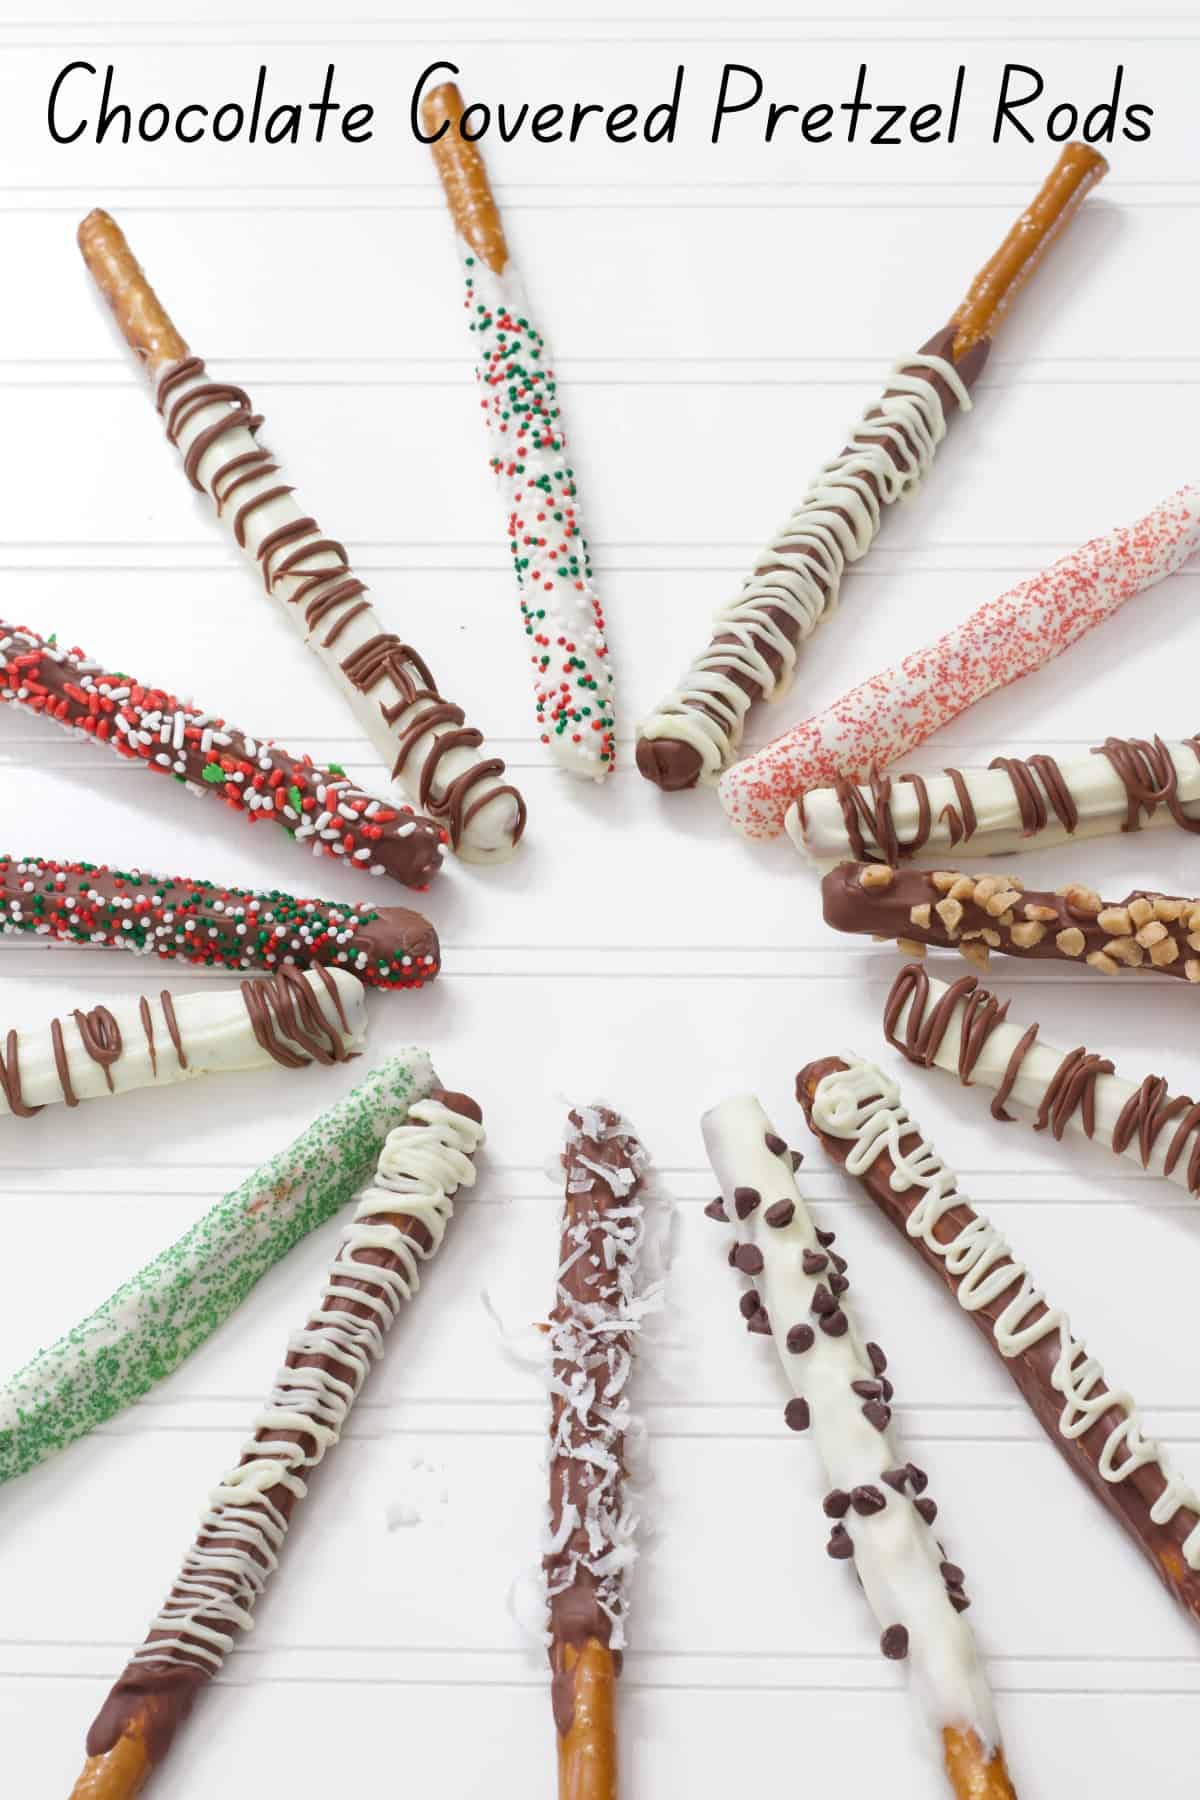 Many finished chocolate covered pretzel rods on a white background.